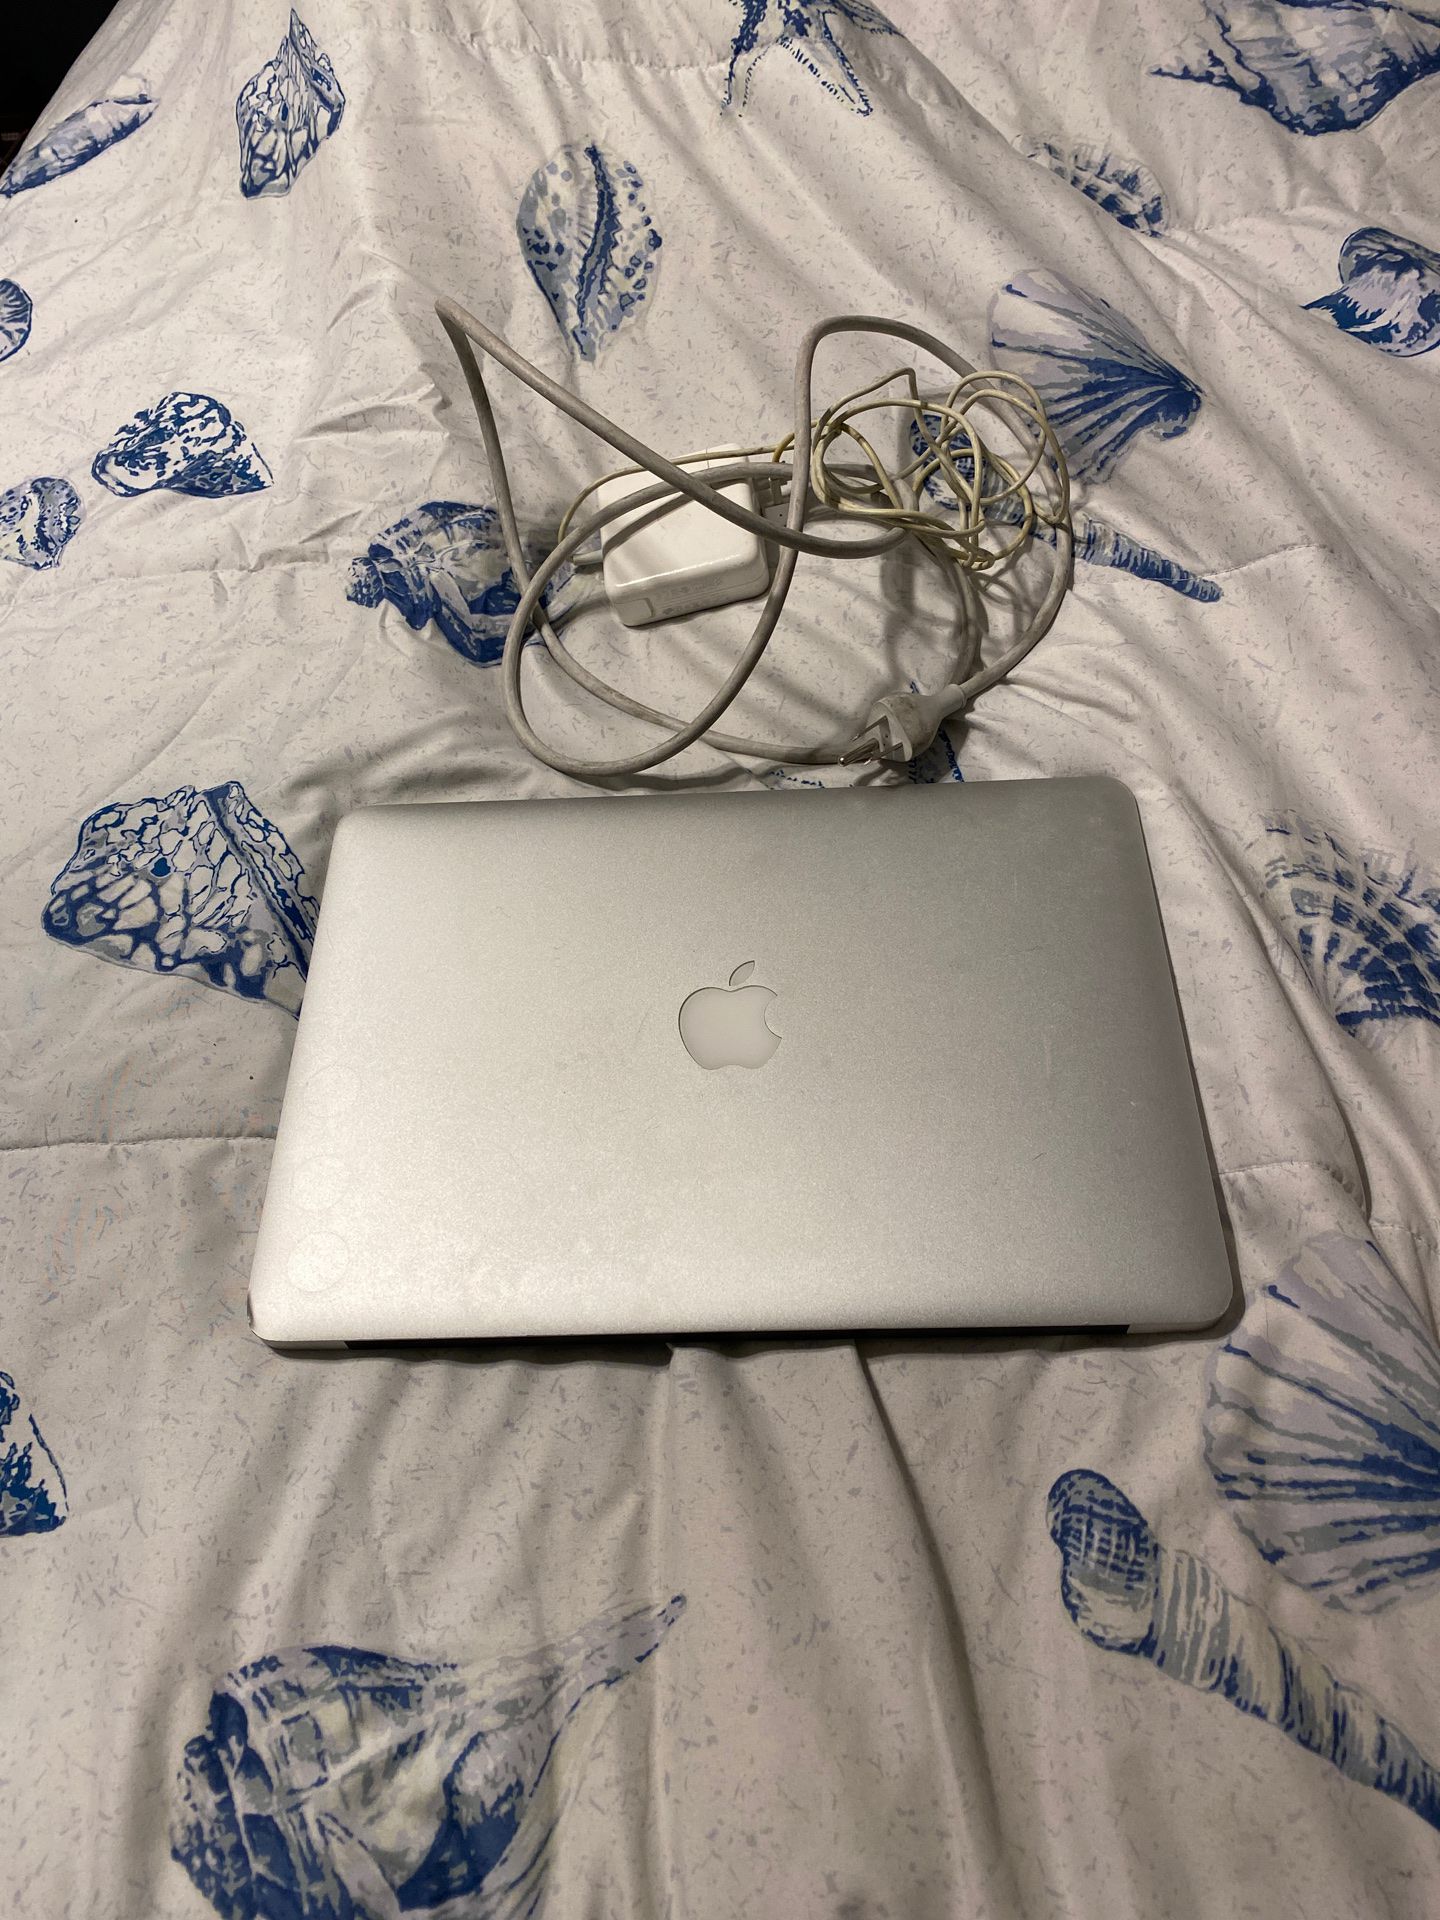 Apple computer for parts, icloud and screen locked